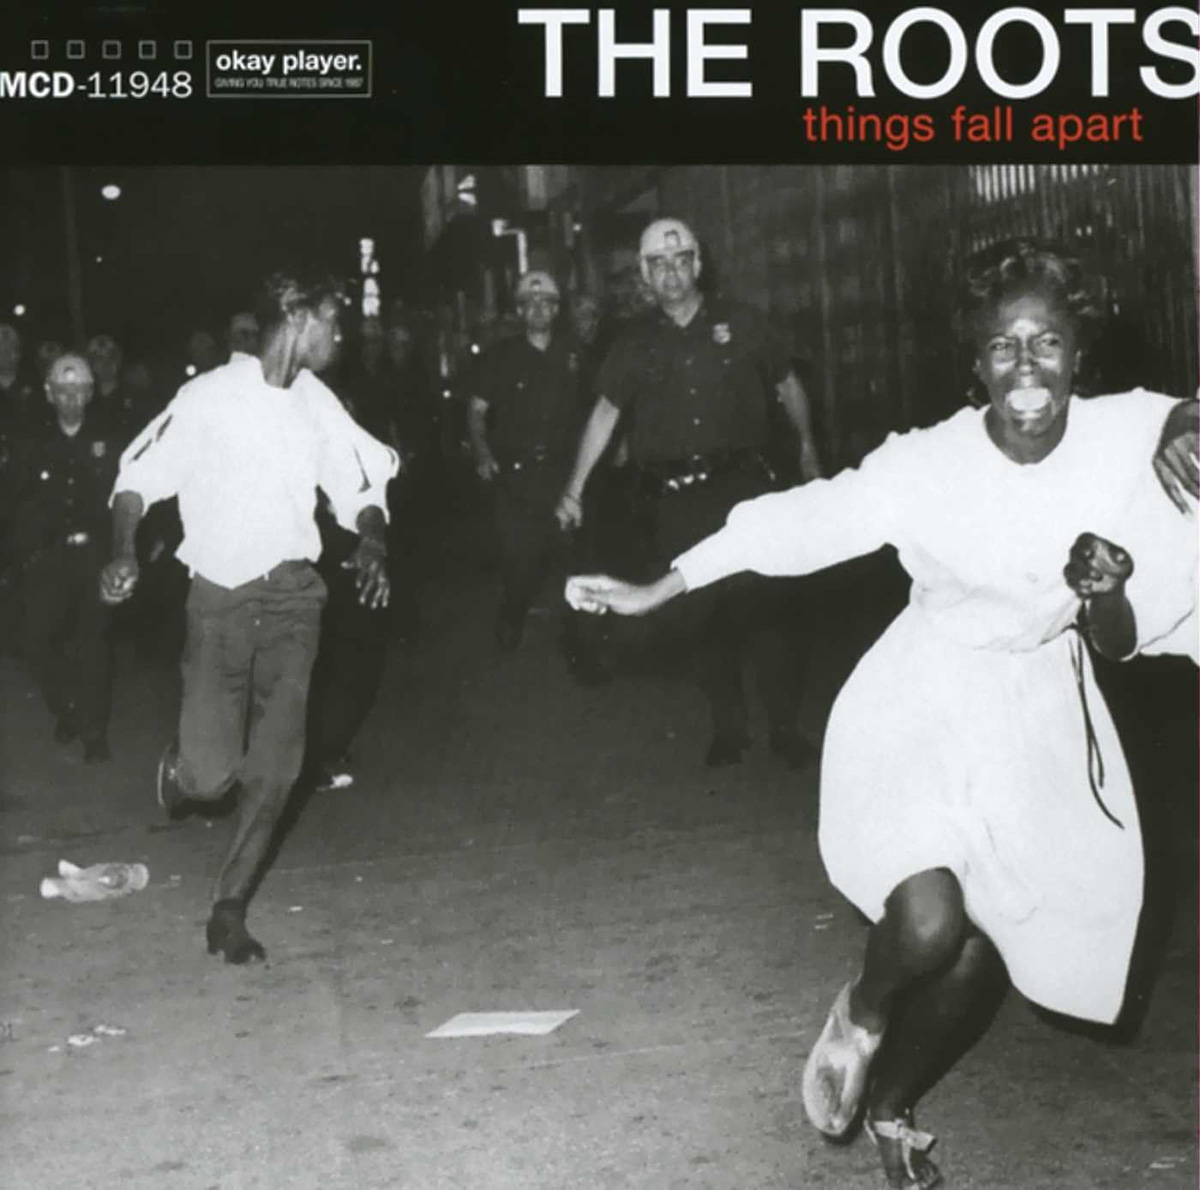 Things fall apart the roots Album cover